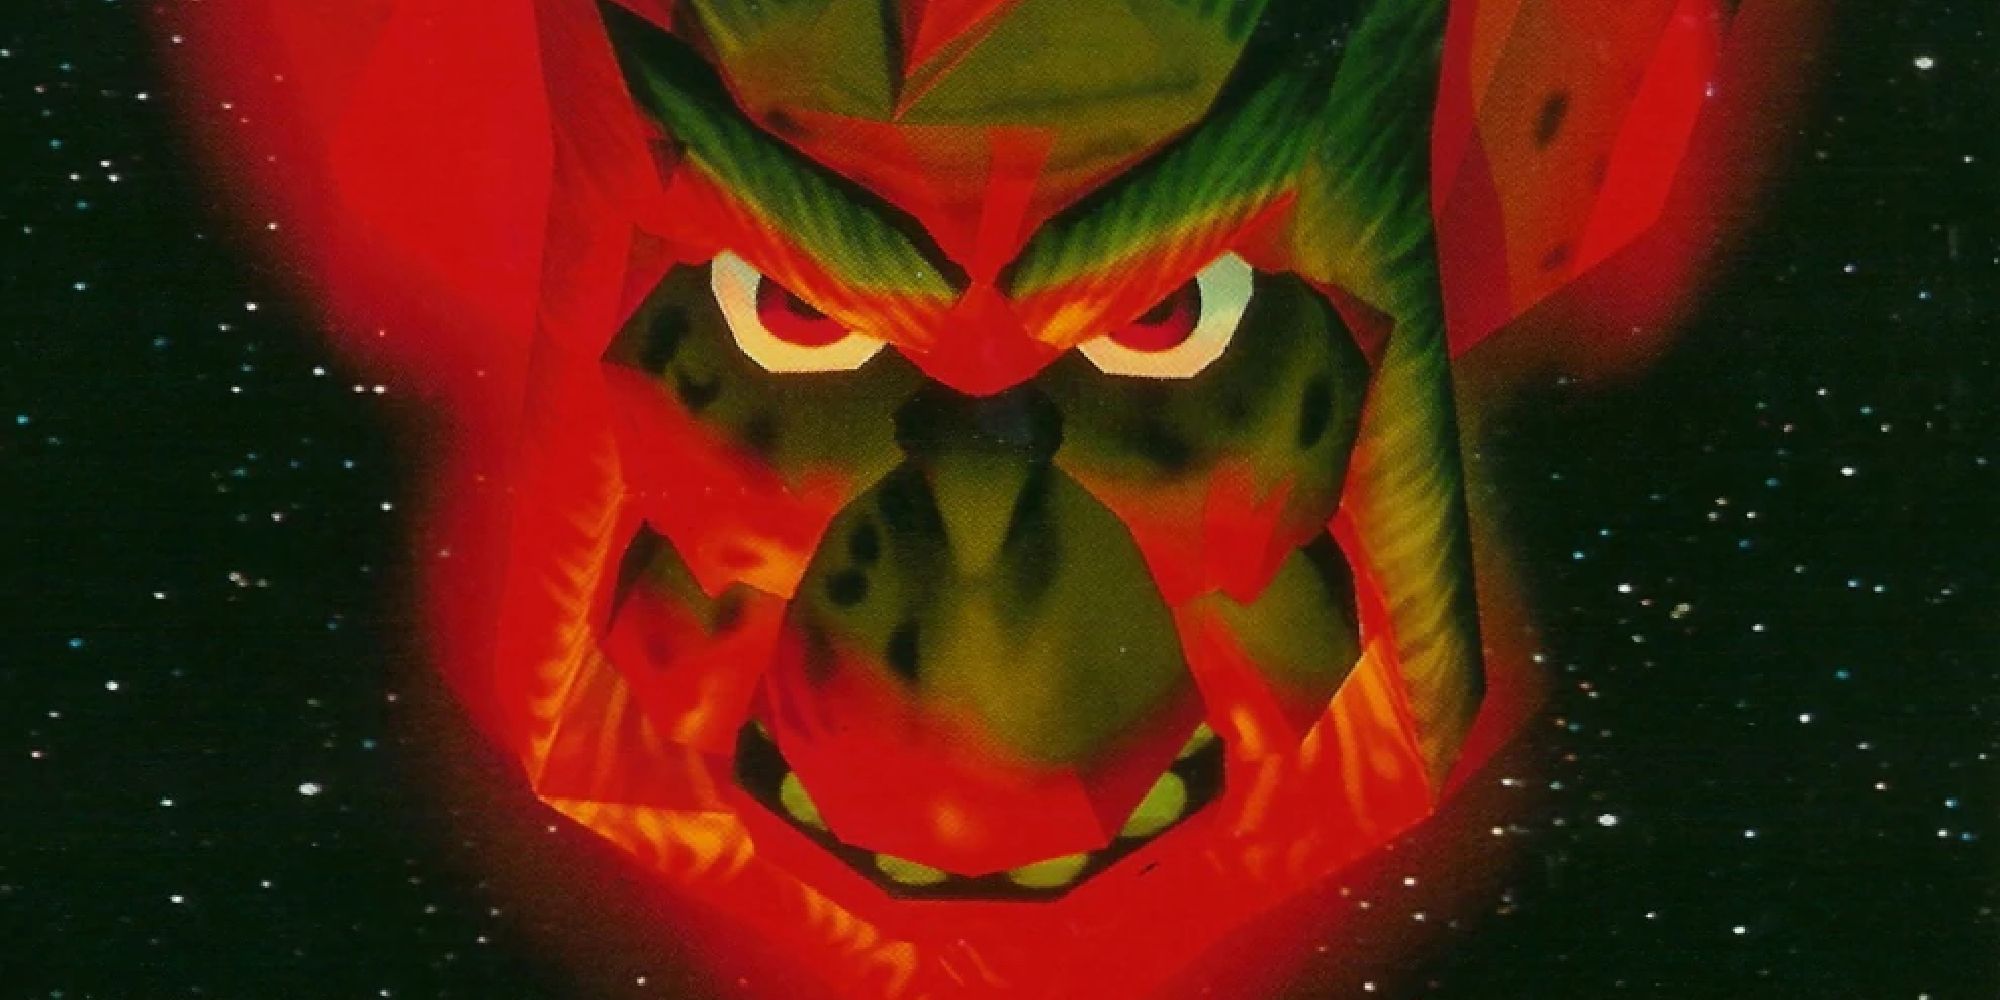 Andross' head in space in promo art for Star Fox 64